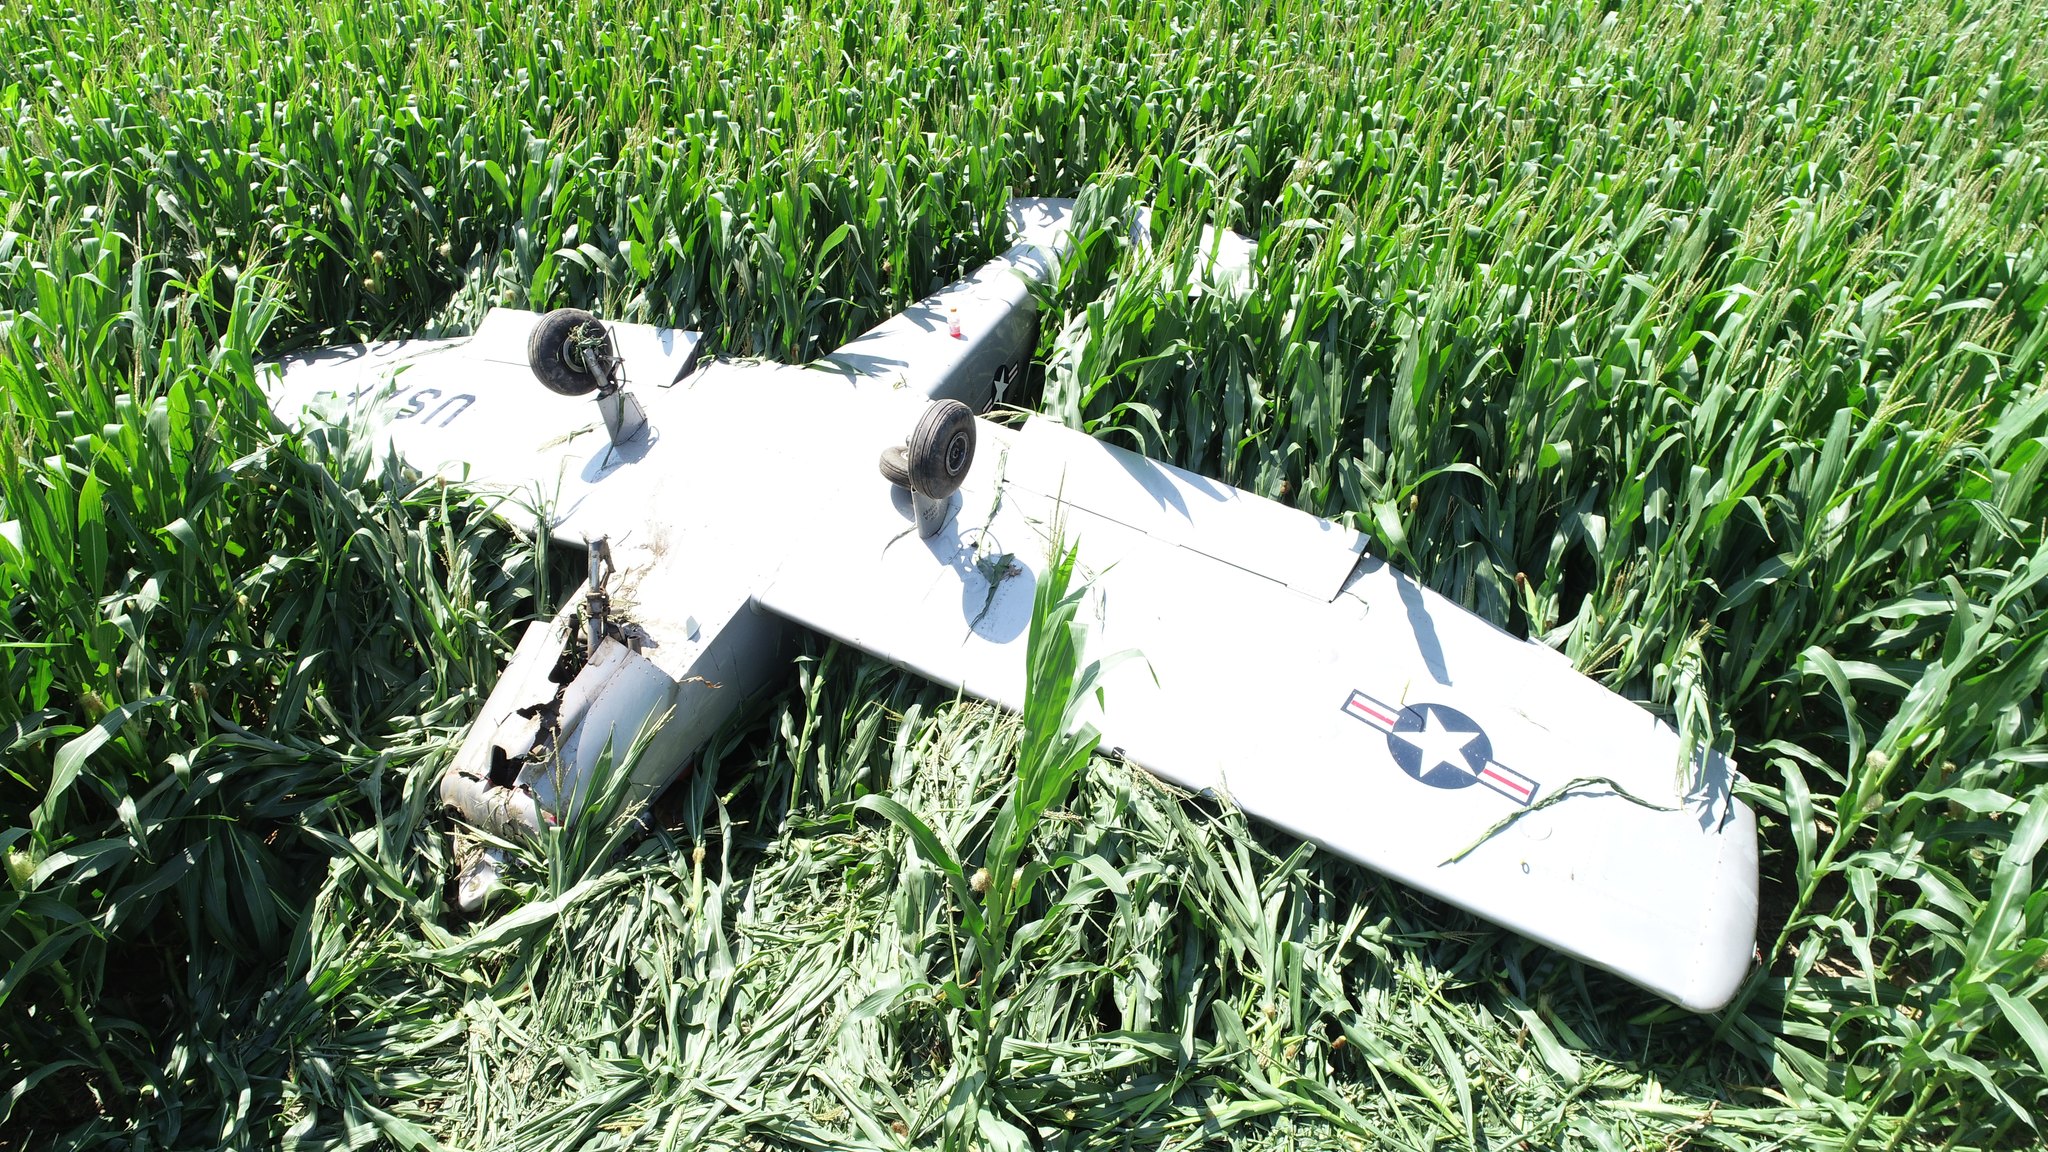 This plane went down in Green Lake County's town of Brooklyn on Thursday